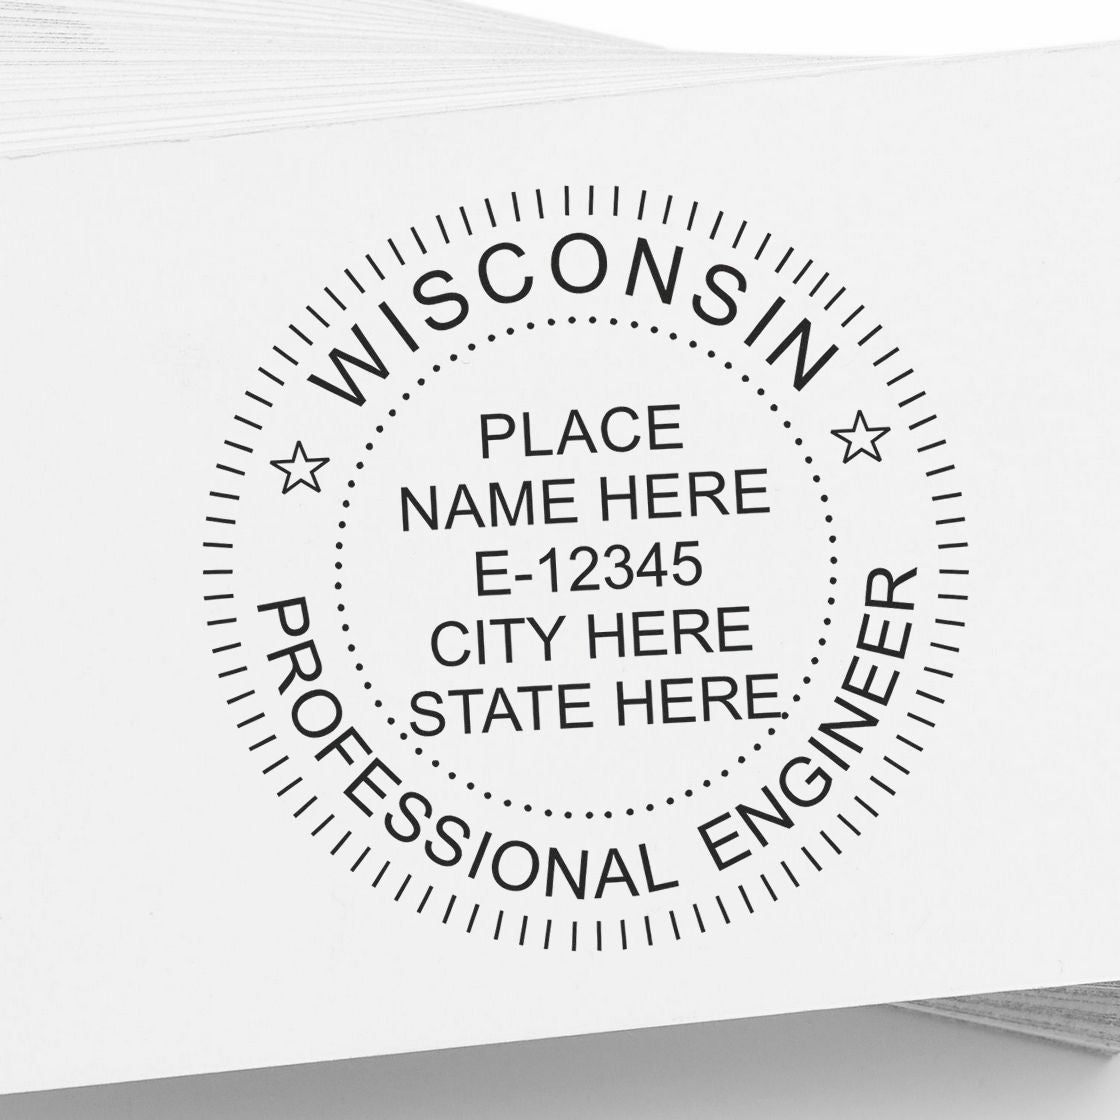 A stamped impression of the Premium MaxLight Pre-Inked Wisconsin Engineering Stamp in this stylish lifestyle photo, setting the tone for a unique and personalized product.